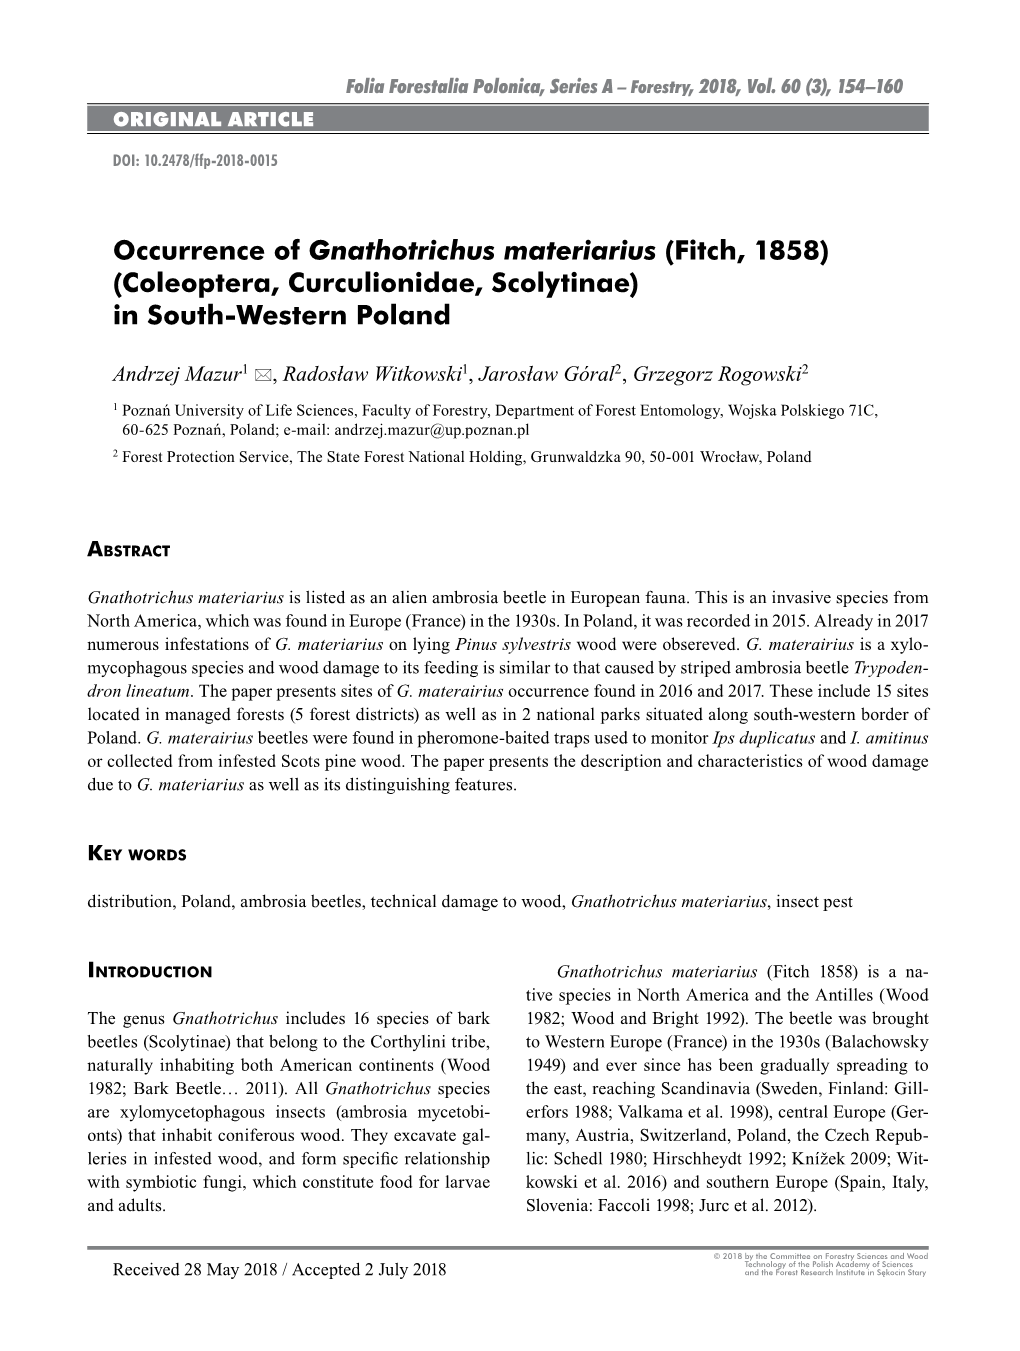 Occurrence of Gnathotrichus Materiarius (Fitch, 1858) (Coleoptera, Curculionidae, Scolytinae) in South-Western Poland